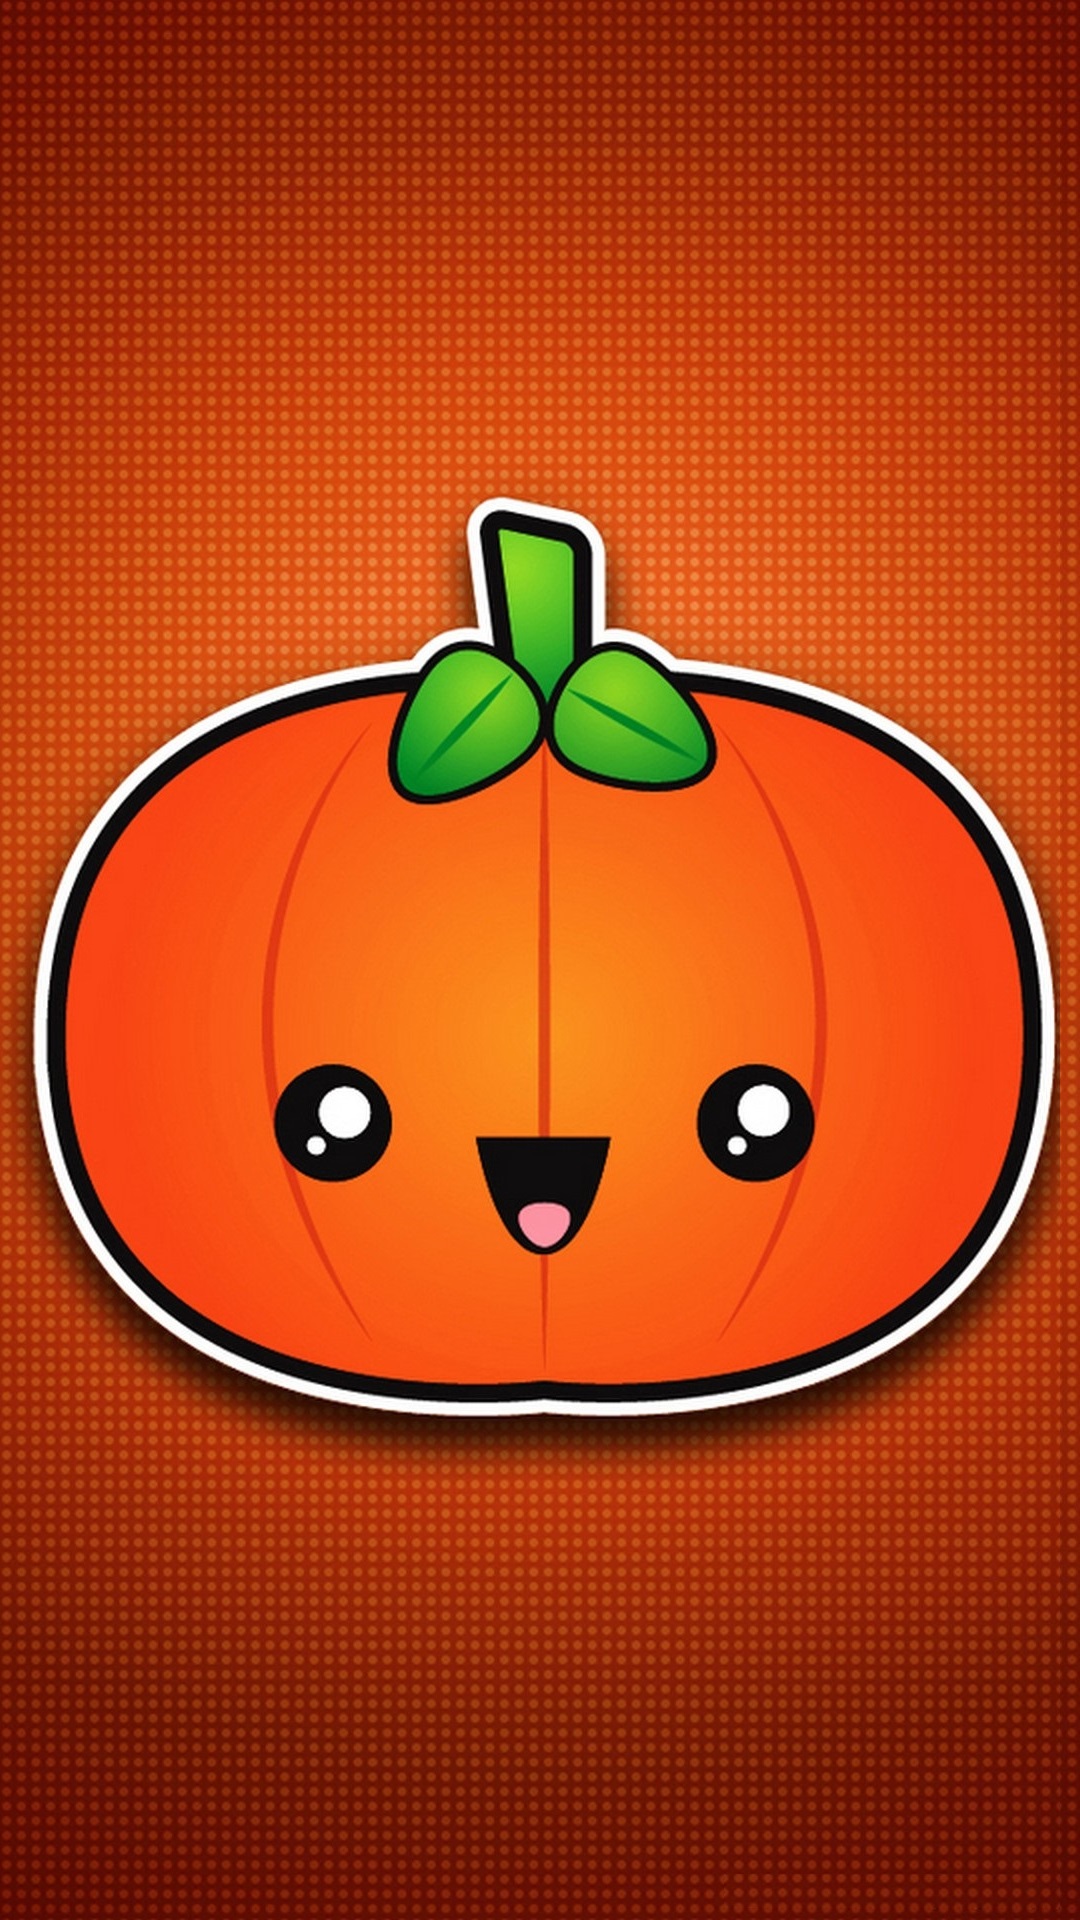 Cute Halloween iPhone Wallpaper in HD with high-resolution 1080x1920 pixel. You can set as wallpaper for Apple iPhone X, XS Max, XR, 8, 7, 6, SE, iPad. Enjoy and share your favorite HD wallpapers and background images